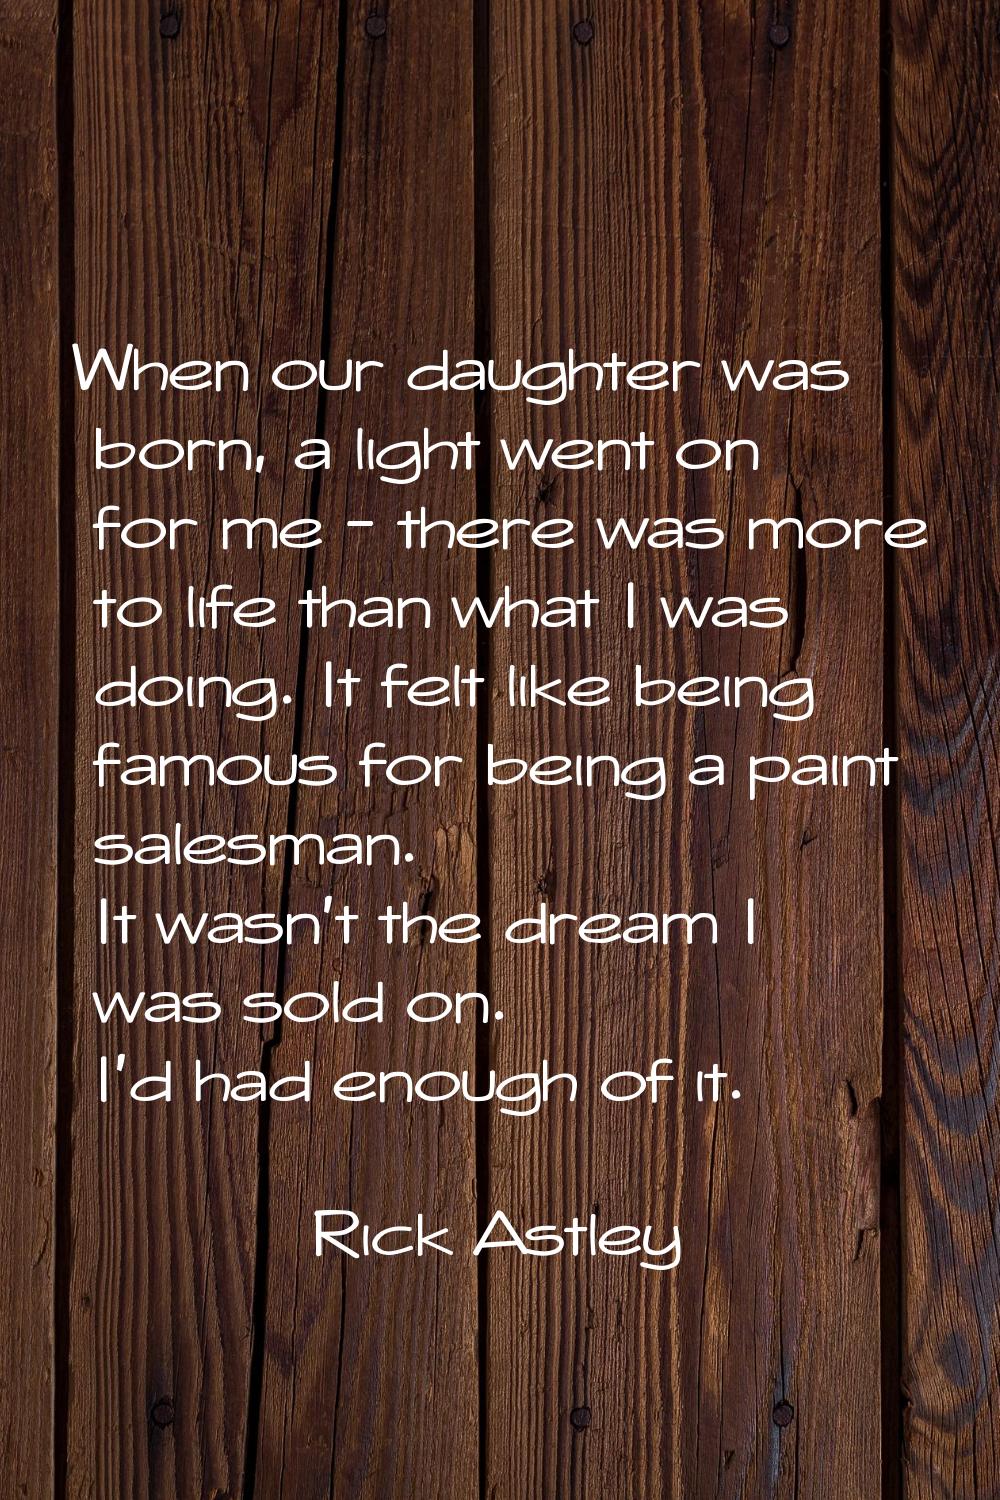 When our daughter was born, a light went on for me - there was more to life than what I was doing. 